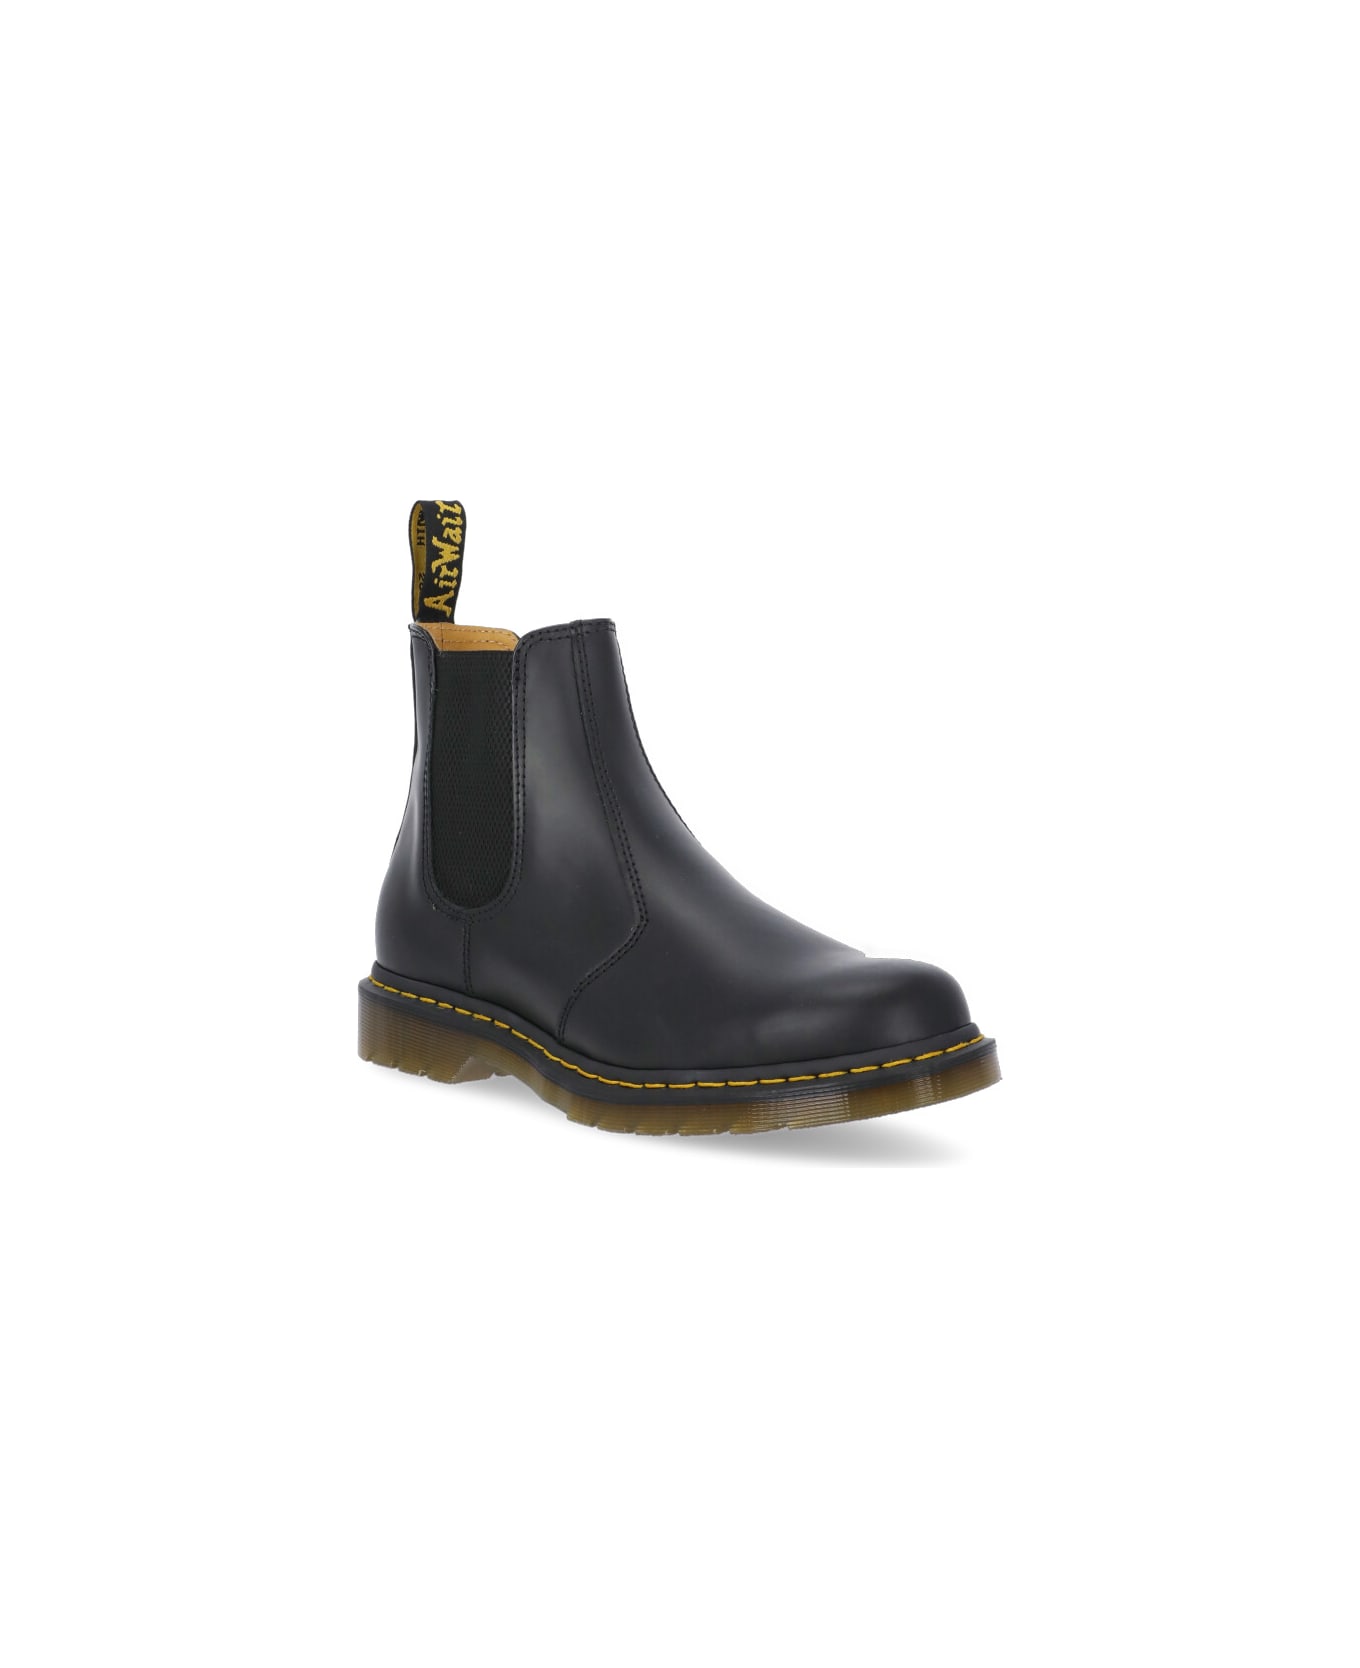 Dr. Martens 2976 Smooth Leather Chelsea Boots - Black シューズ